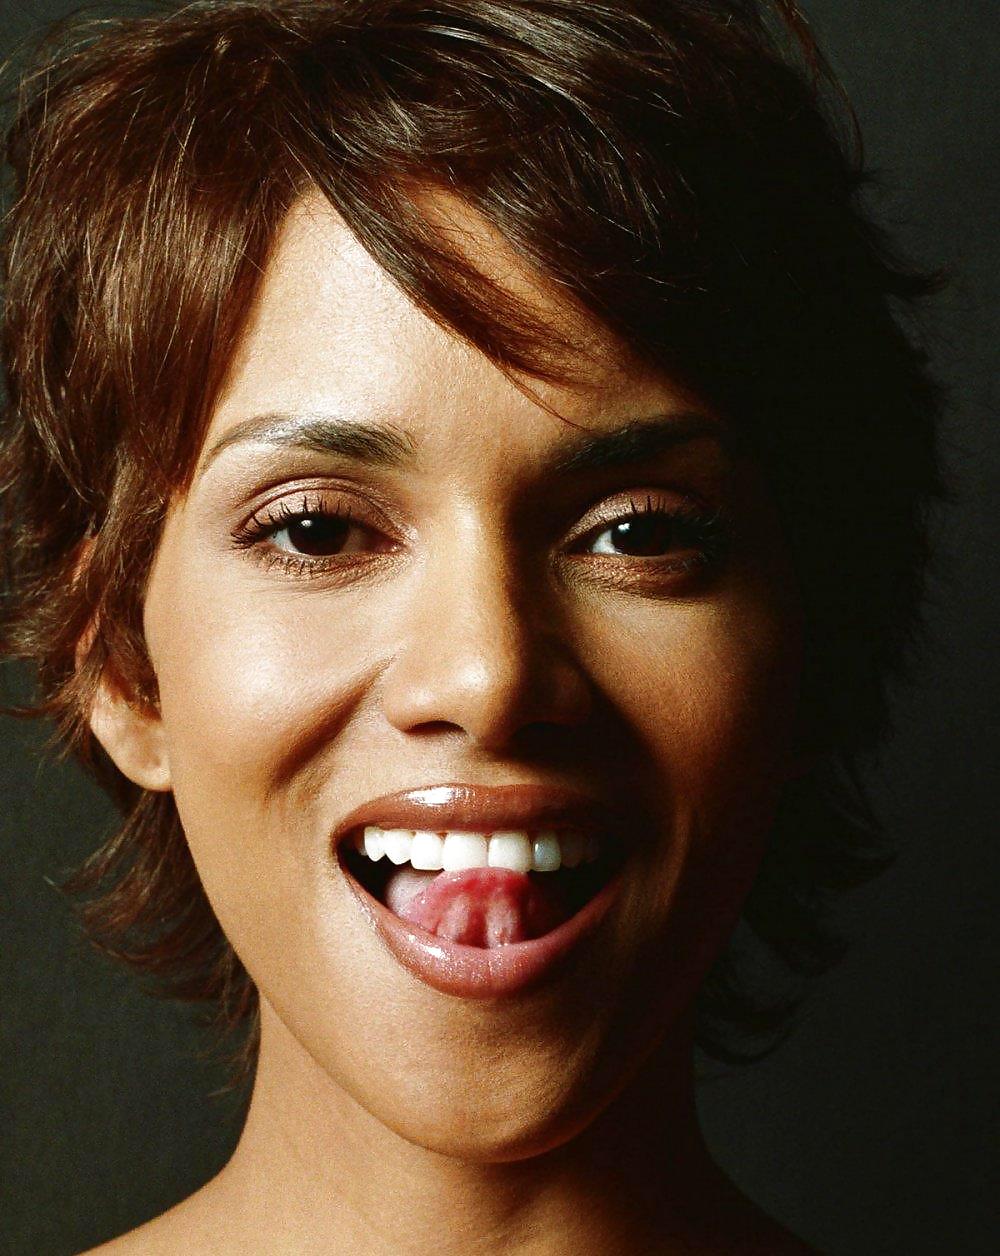 Halle berry ultimate glamour,cleavage,caps
 #8353264